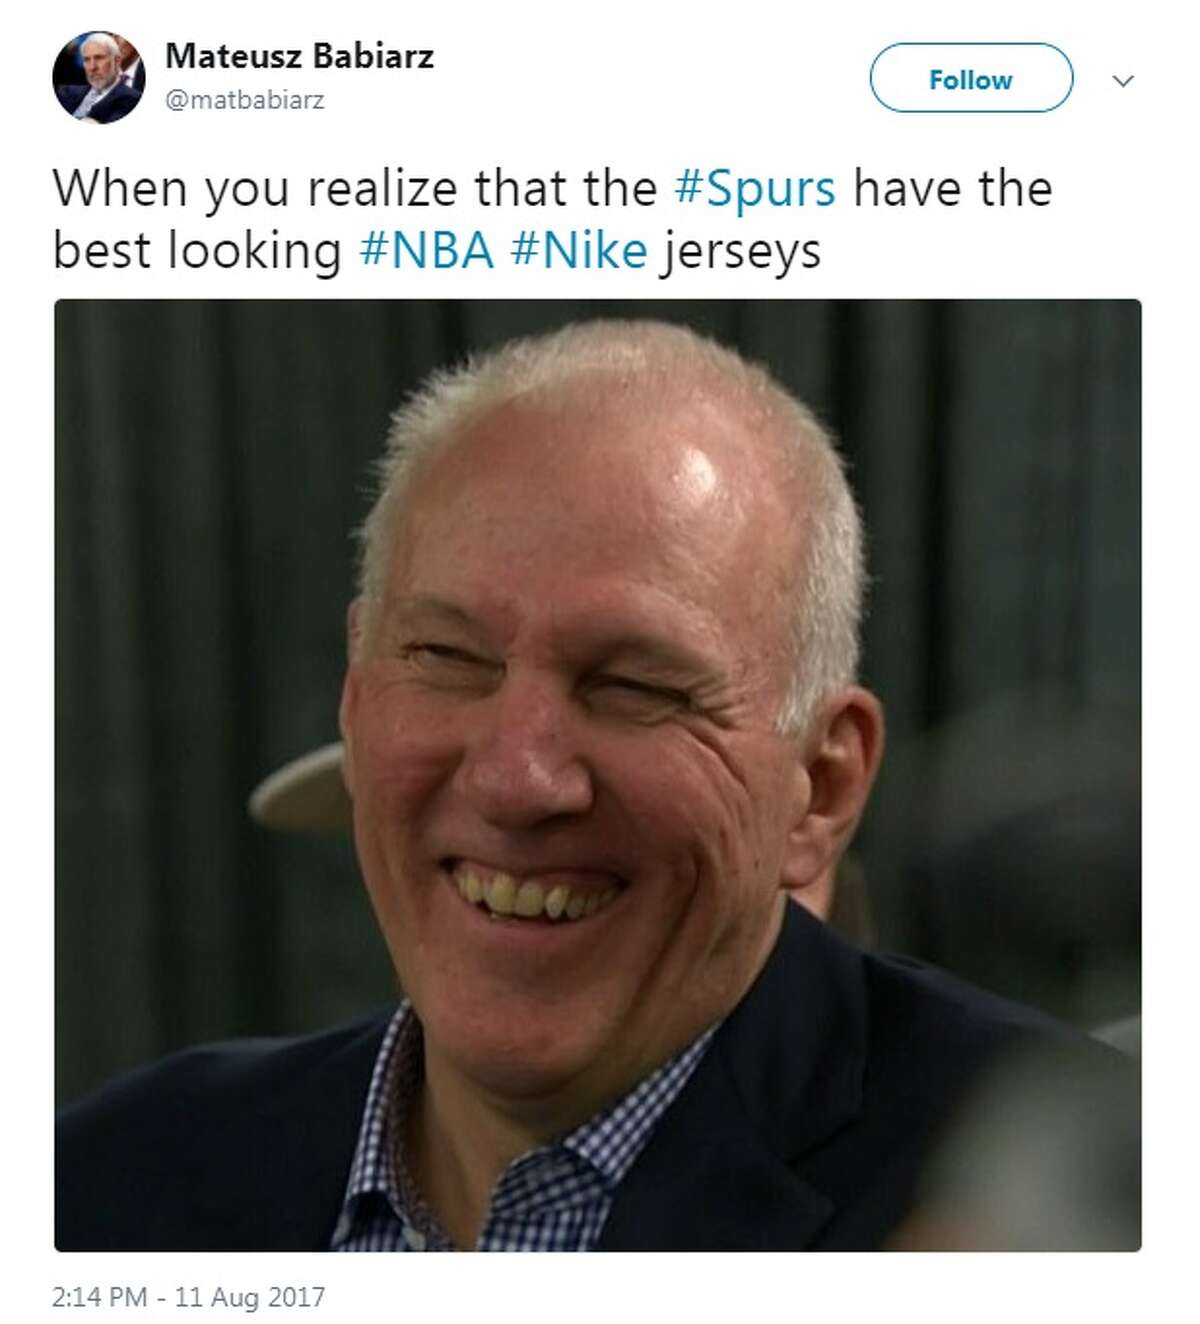 @matbabiarz: "When you realize that the #Spurs have the best looking #NBA #Nike jerseys"